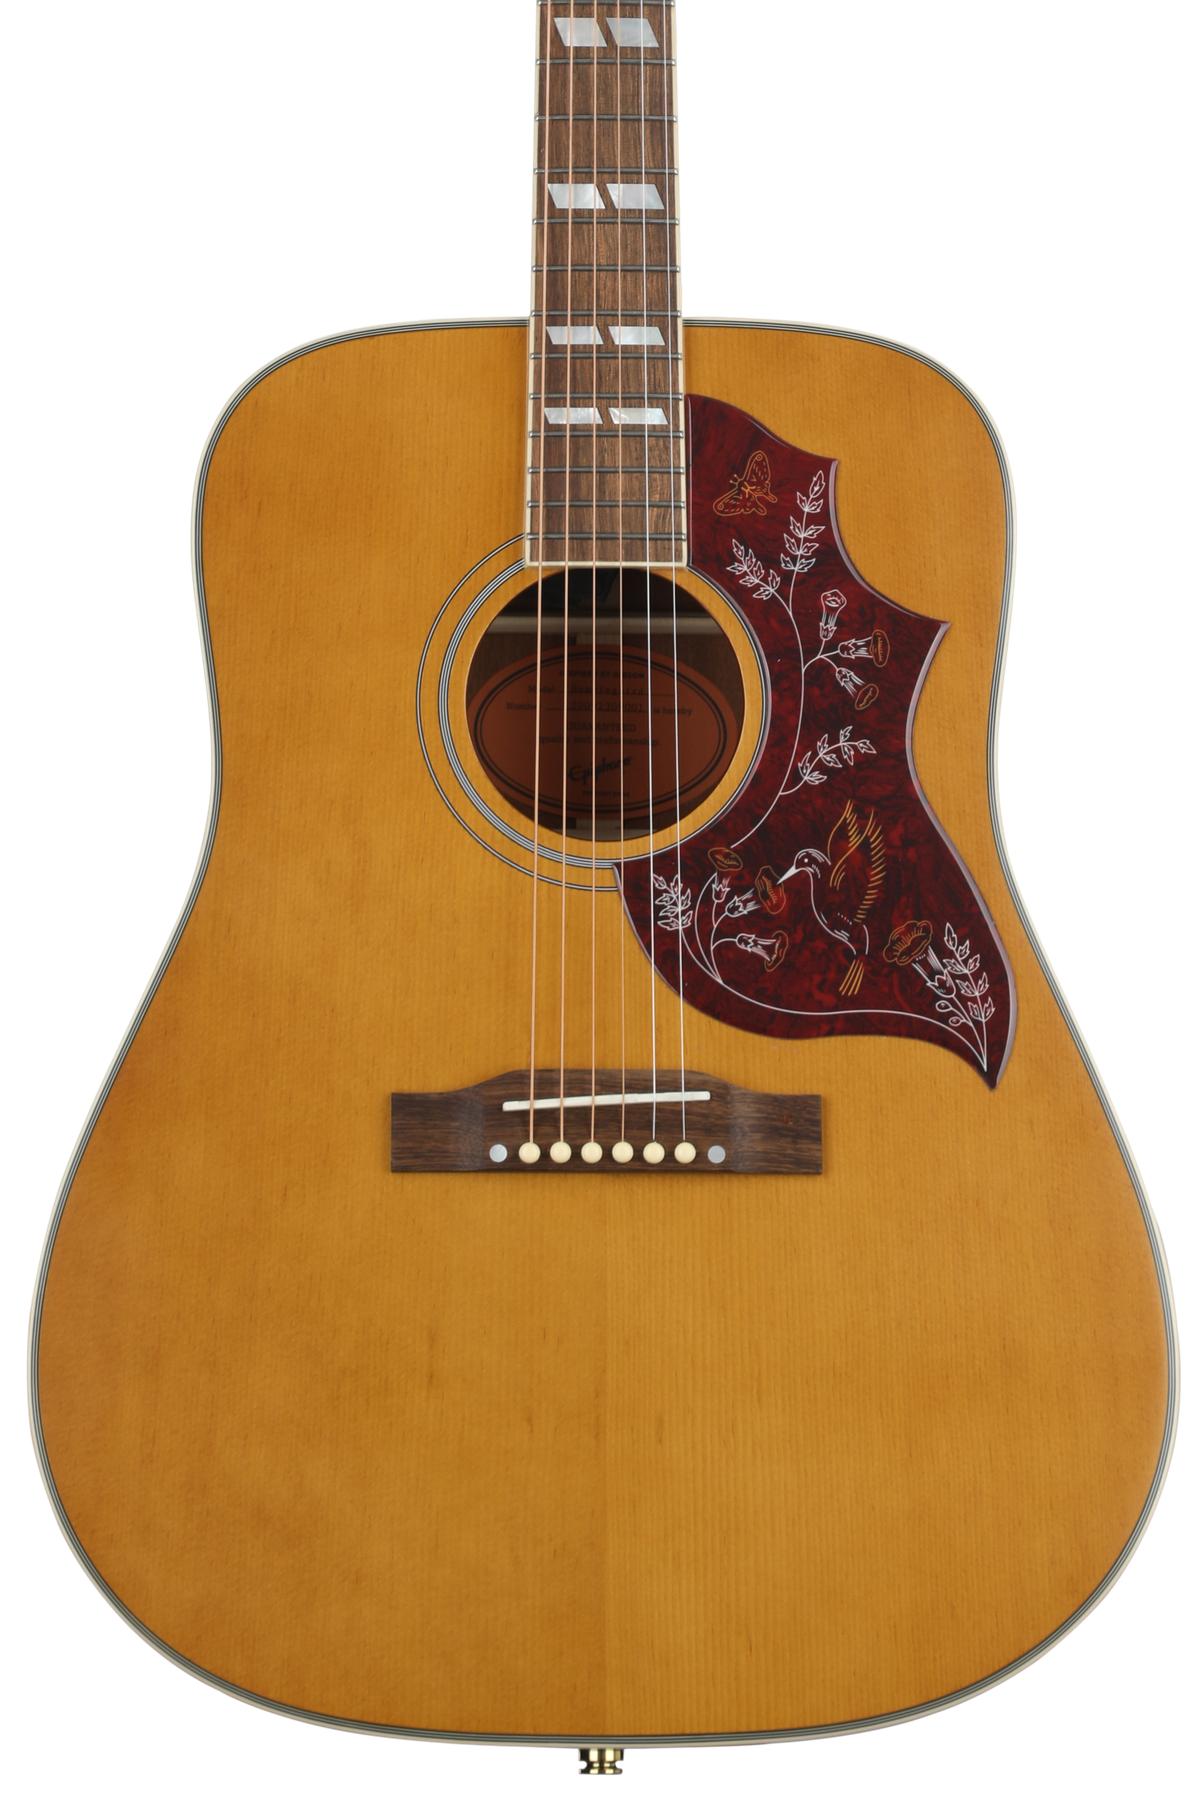 Innocence King Lear Premier Epiphone Hummingbird Acoustic Guitar - Aged Natural Antique Gloss |  Sweetwater